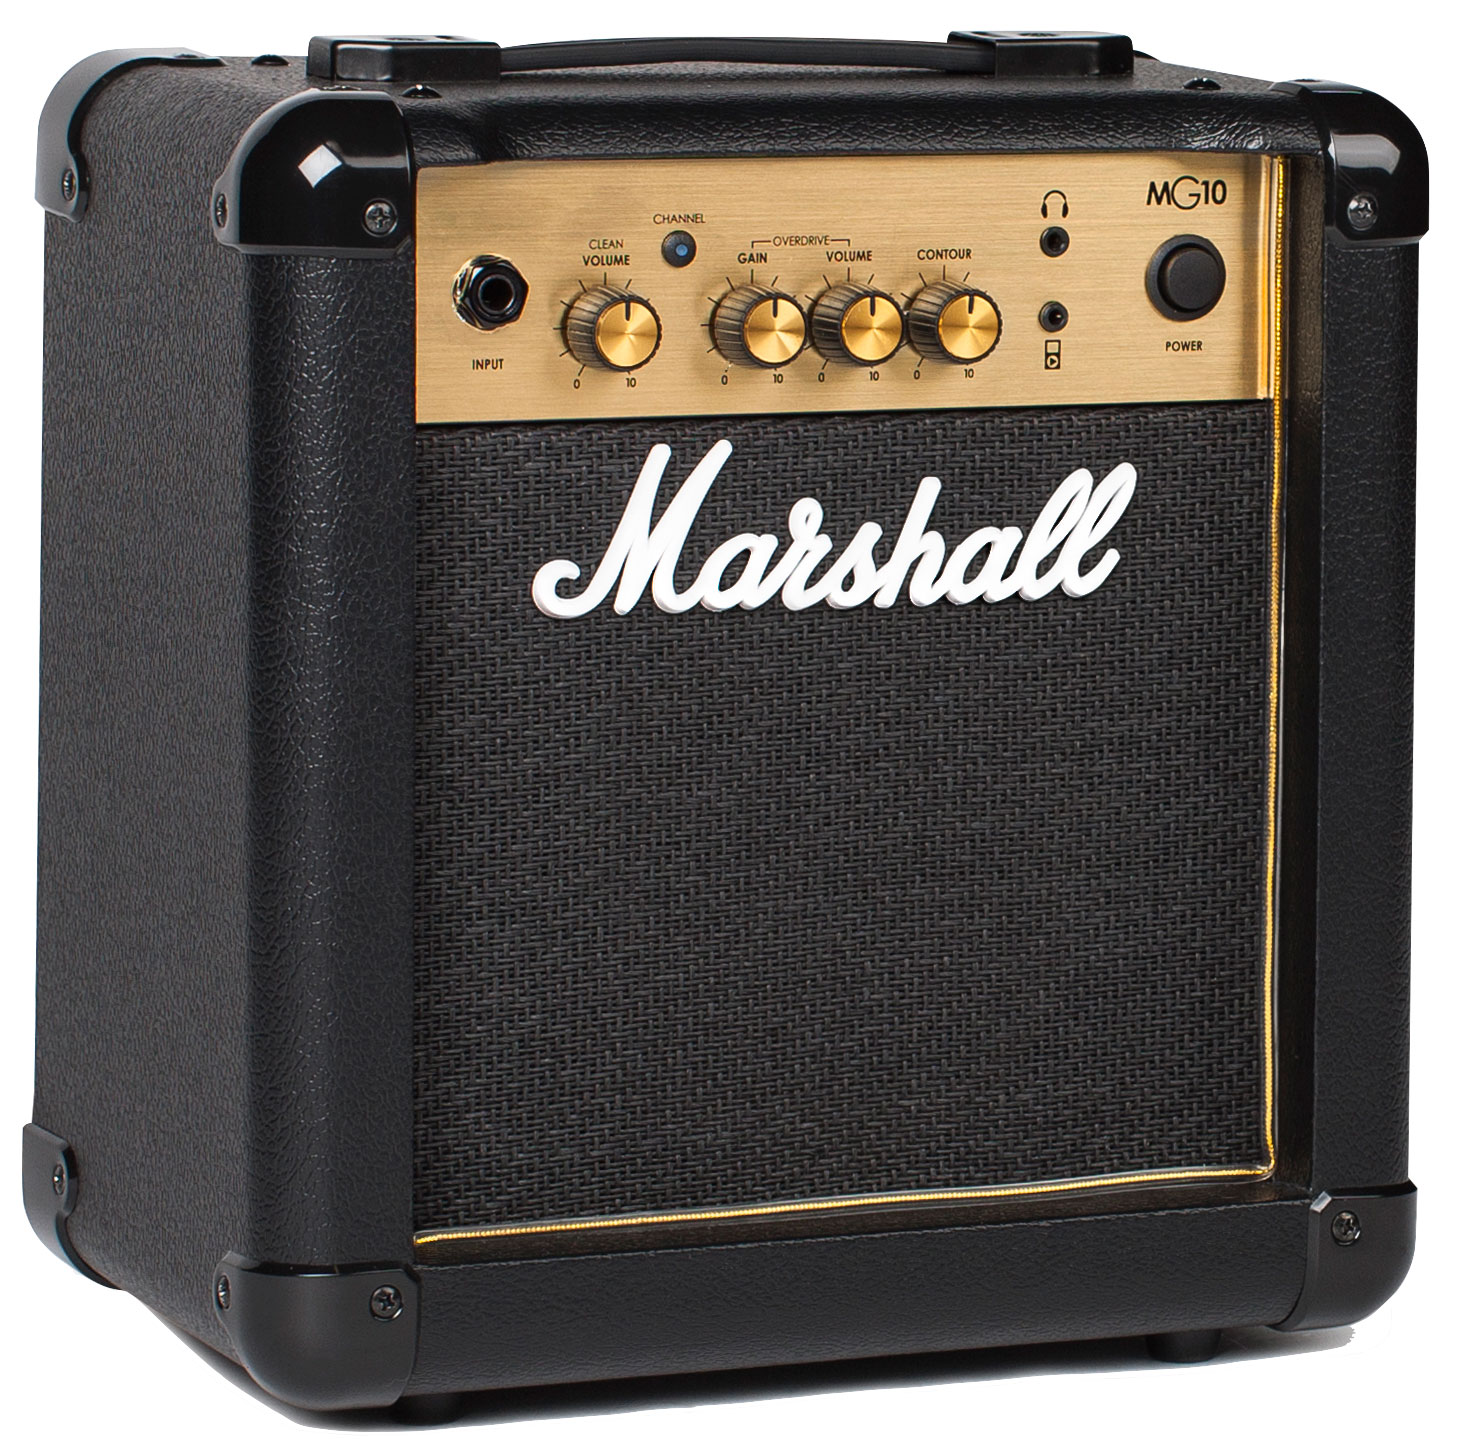 Eastone Str70 +marshall Mg10 10w +cable +mediators +housse - Olympic White - Pack Guitare Électrique - Variation 6